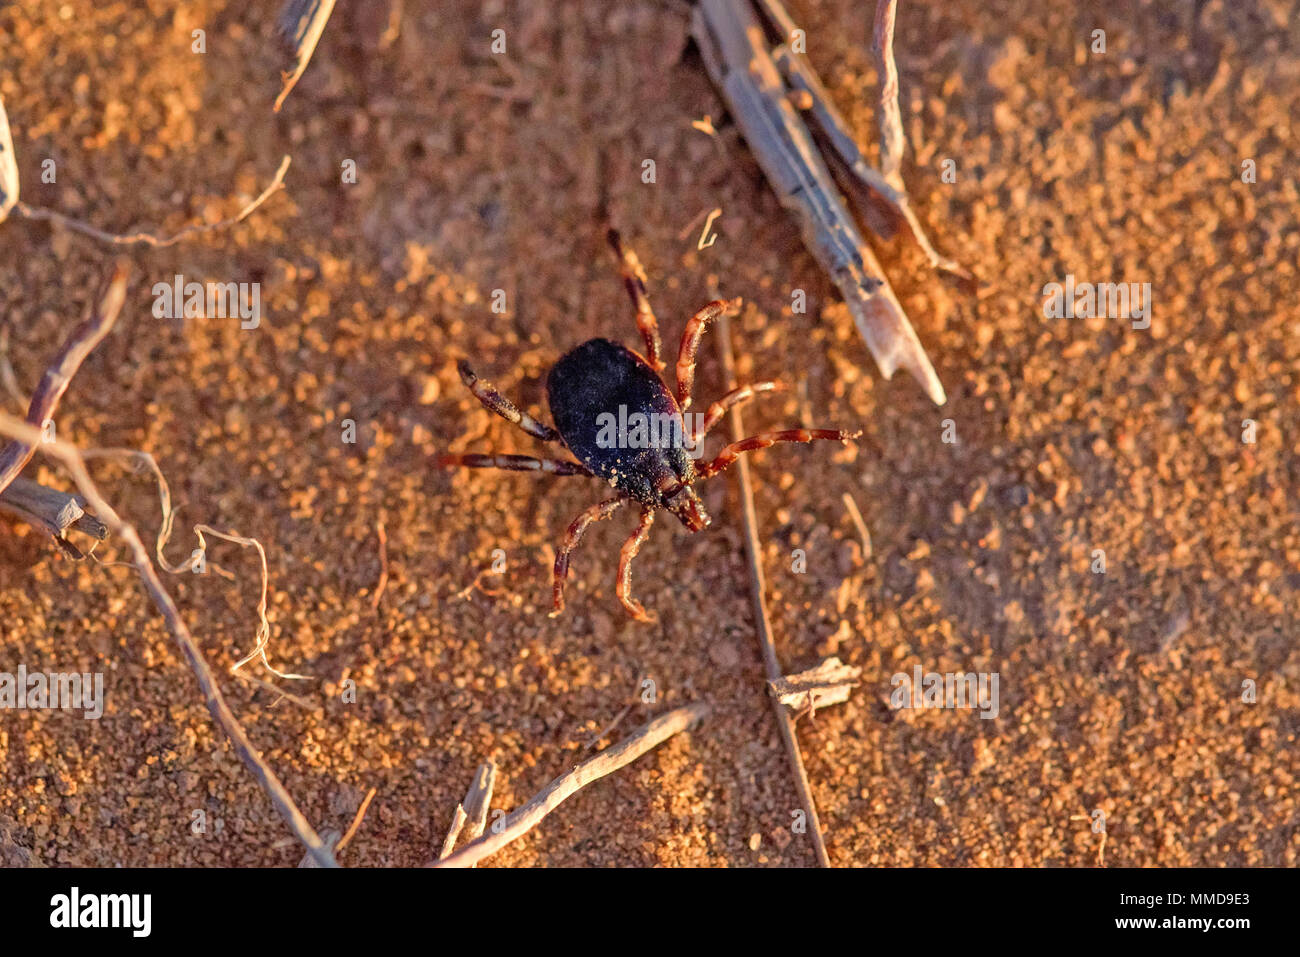 Hyalomma tick from Ixodidae family close Stock Photo